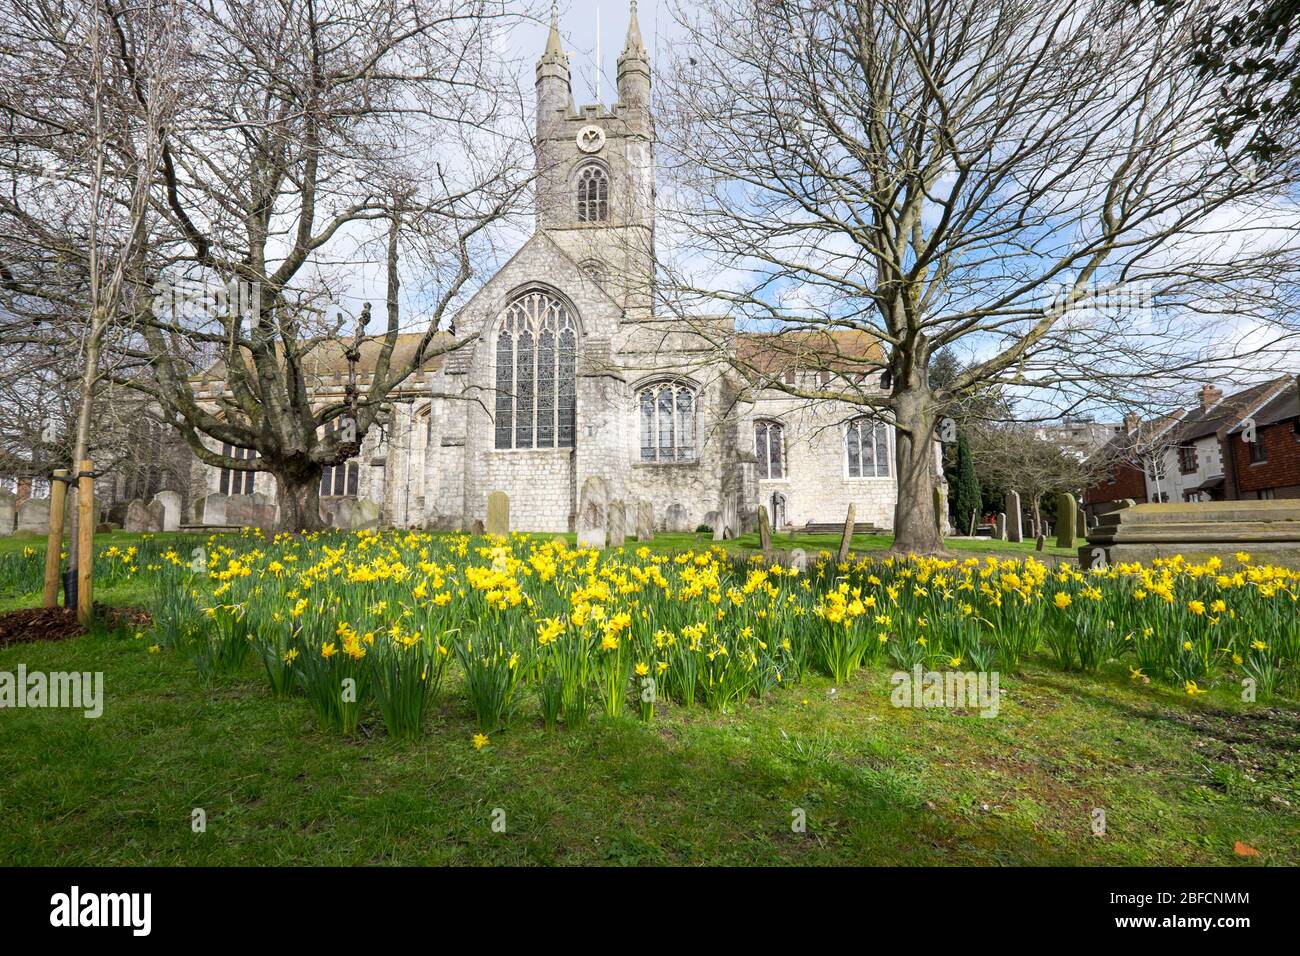 Ashford, Kent, United Kingdom - March 9, 2020: St Mary the Virgin church in town centre in Spring with daffodils in graveyard Stock Photo